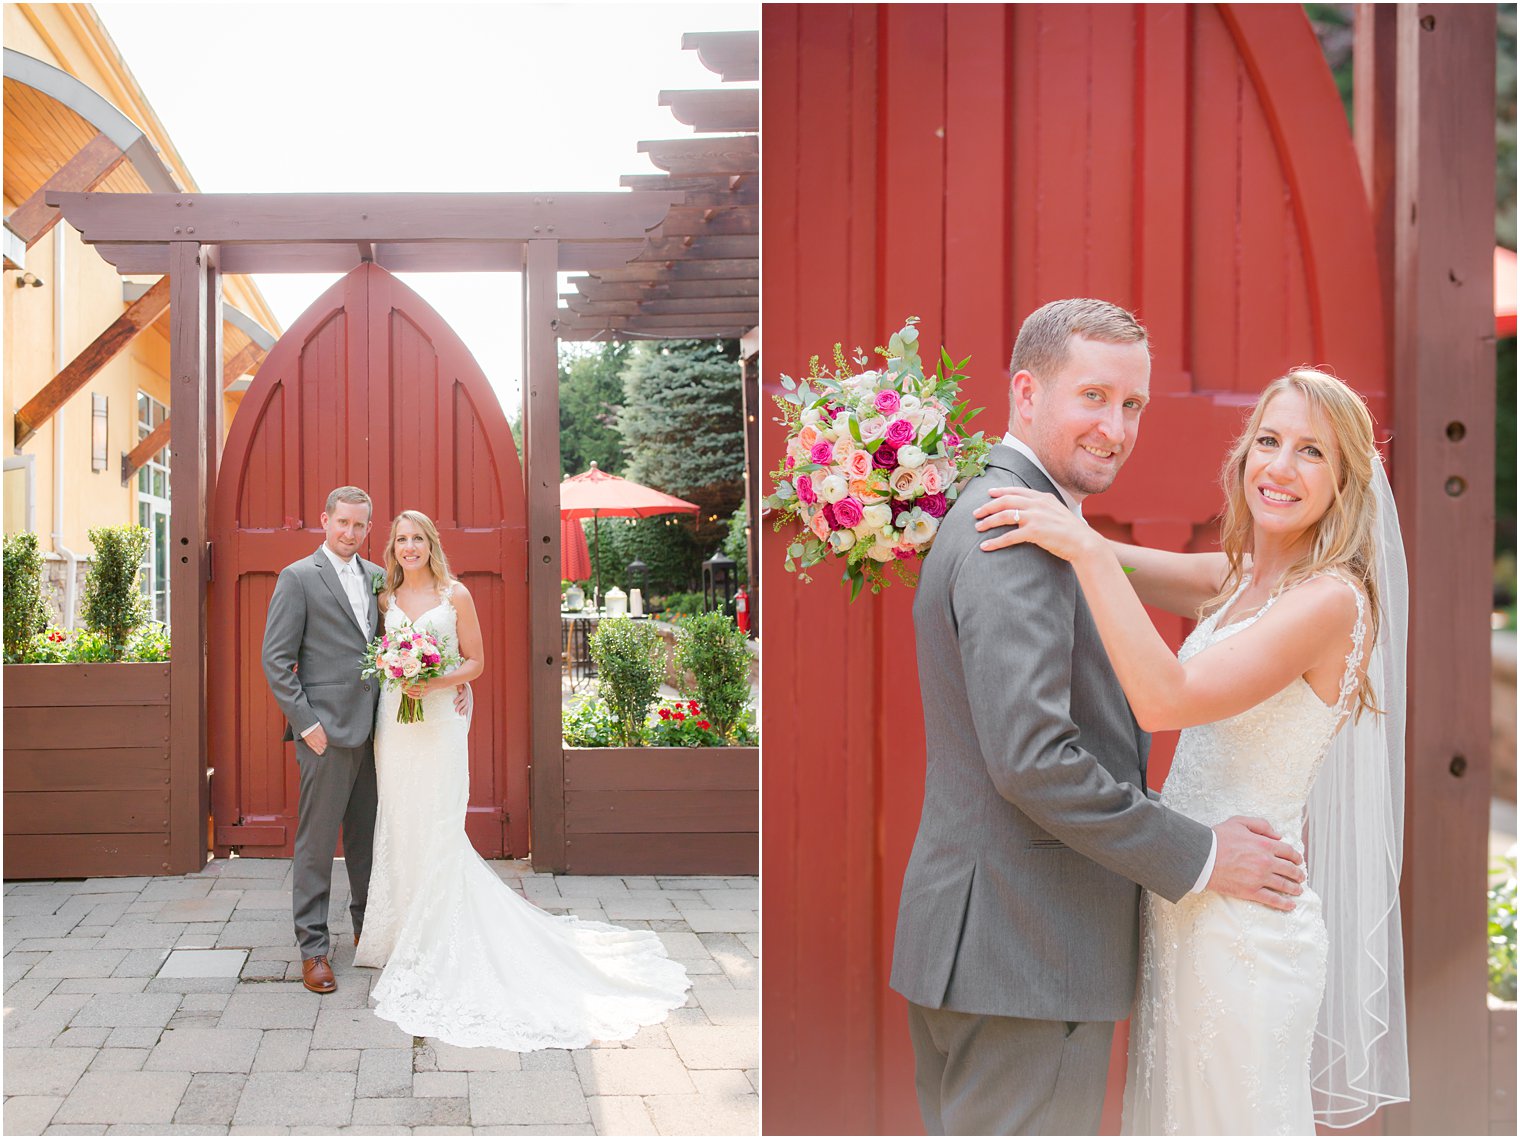 Bride and groom photos at Stone House at Stirling Ridge in Warren, NJ